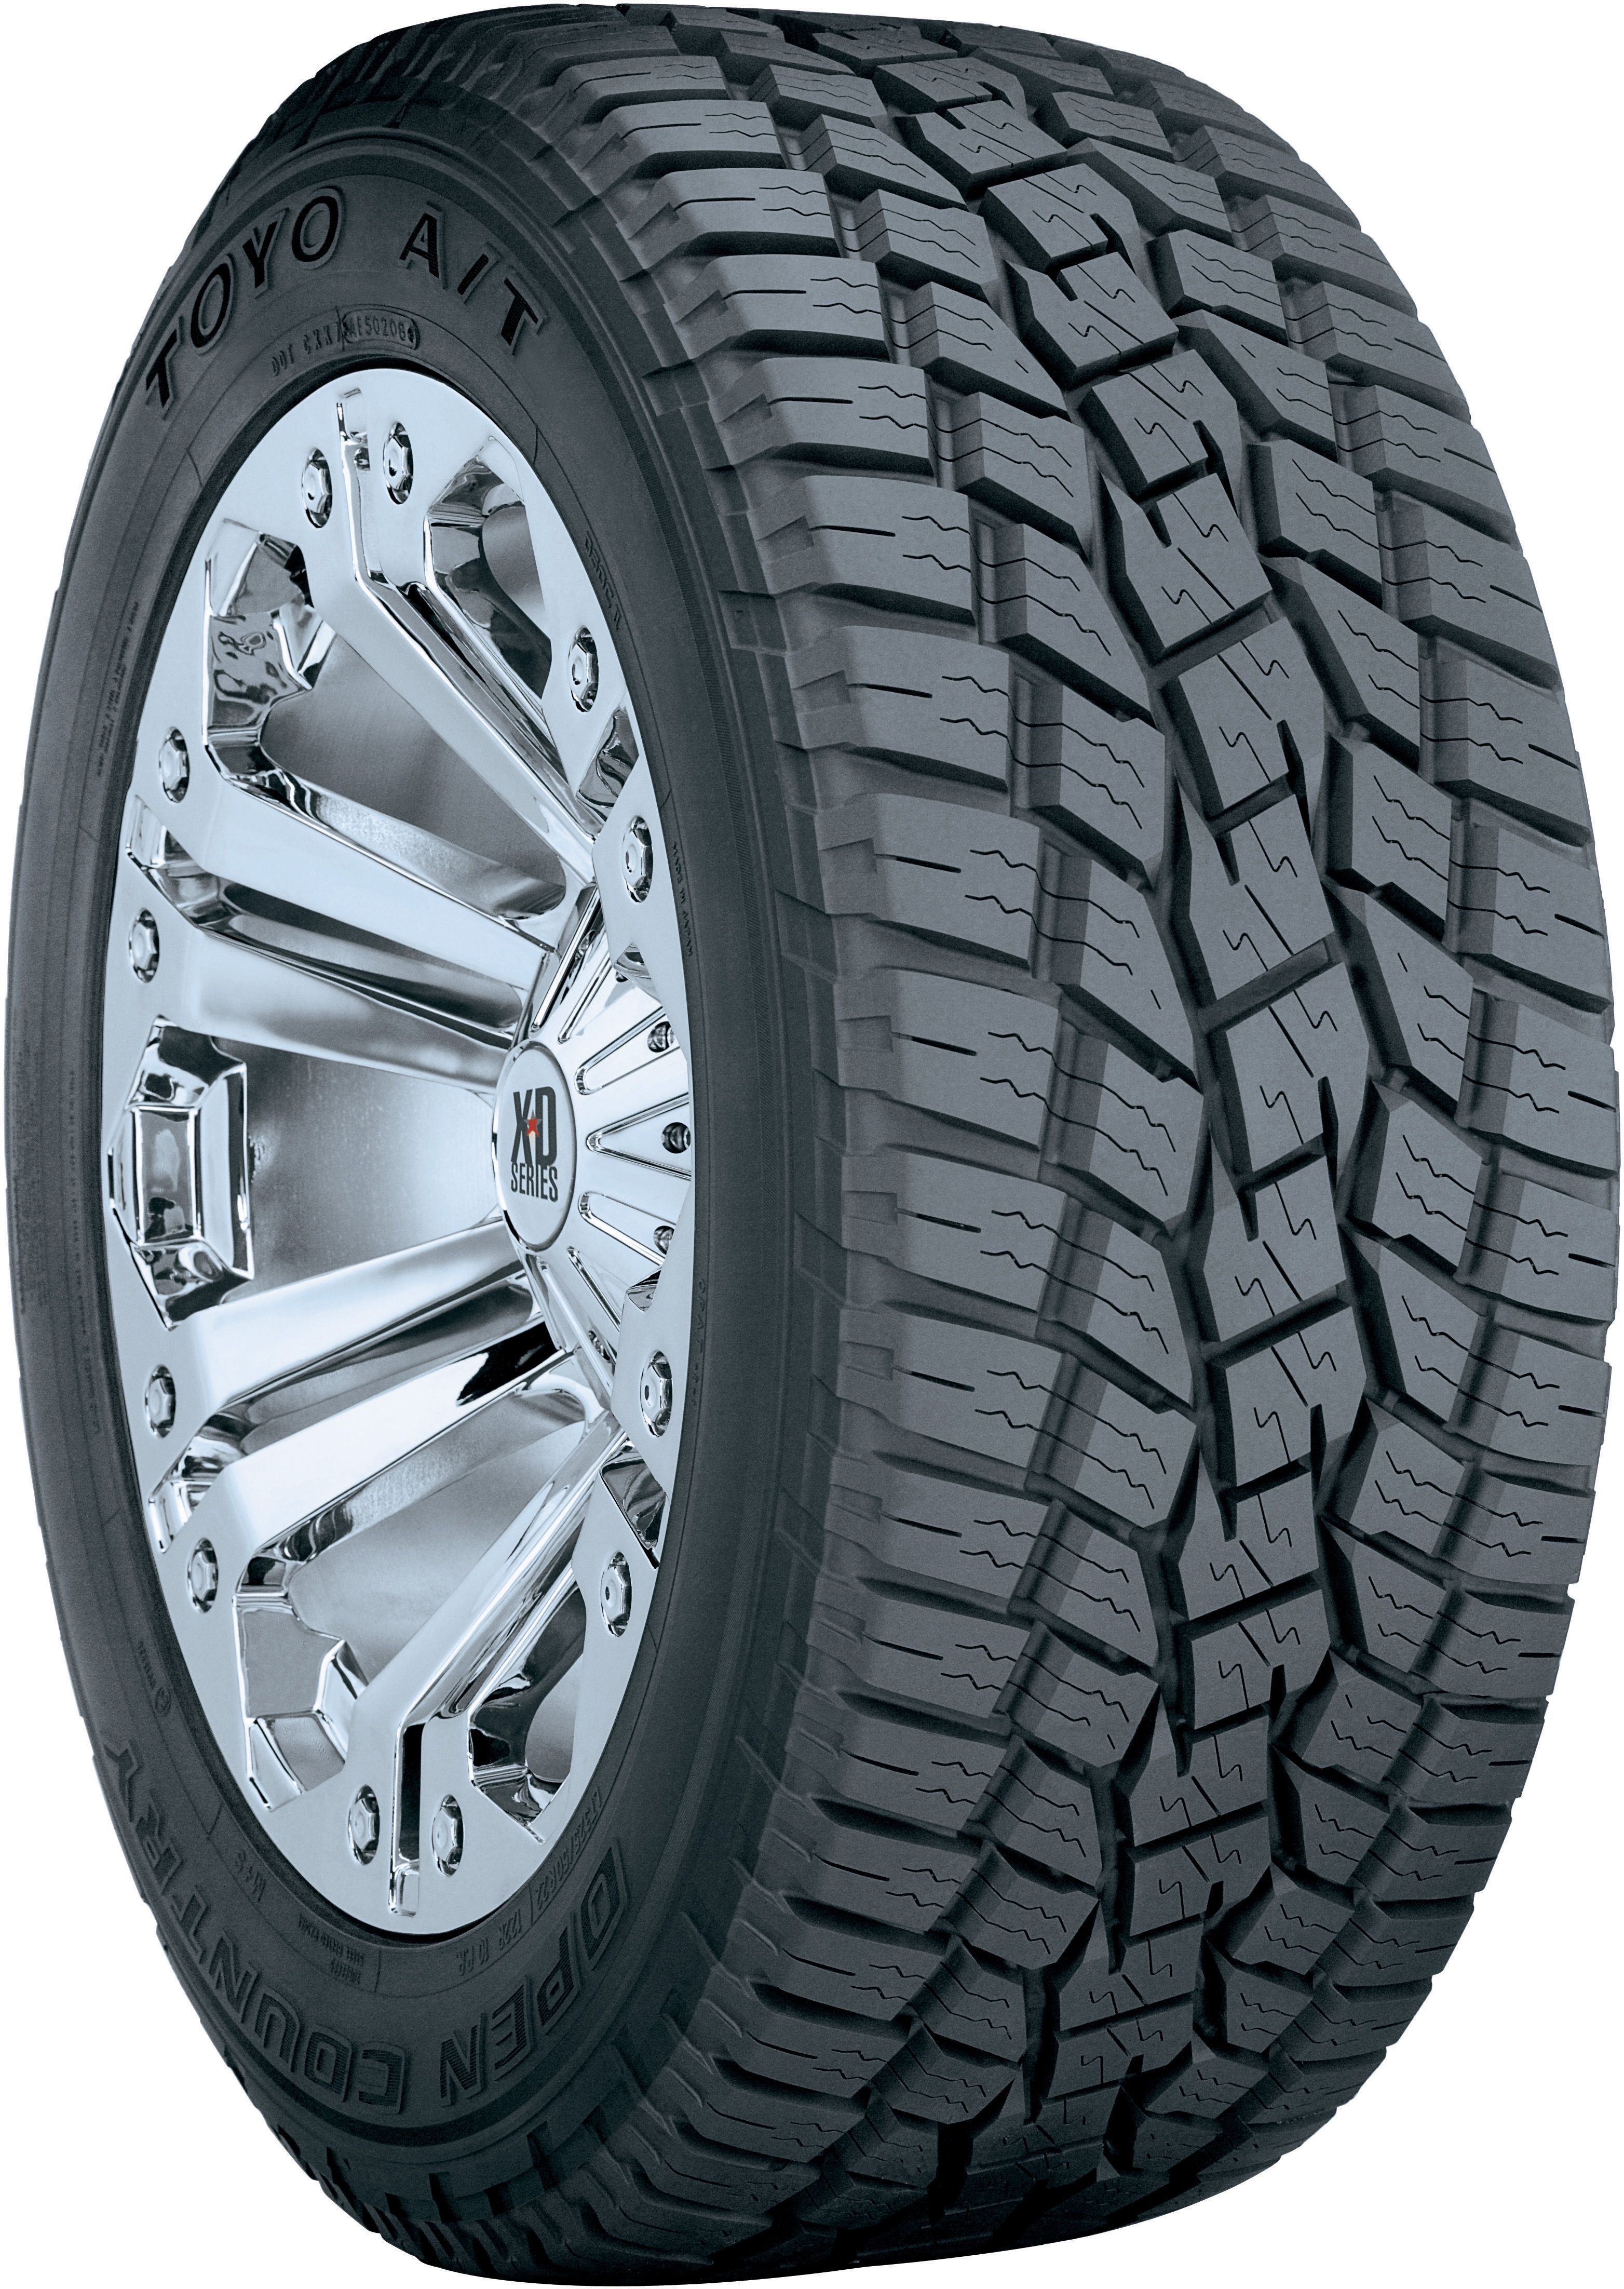 Toyo Open Country A/T+ 265/70 R16 112H